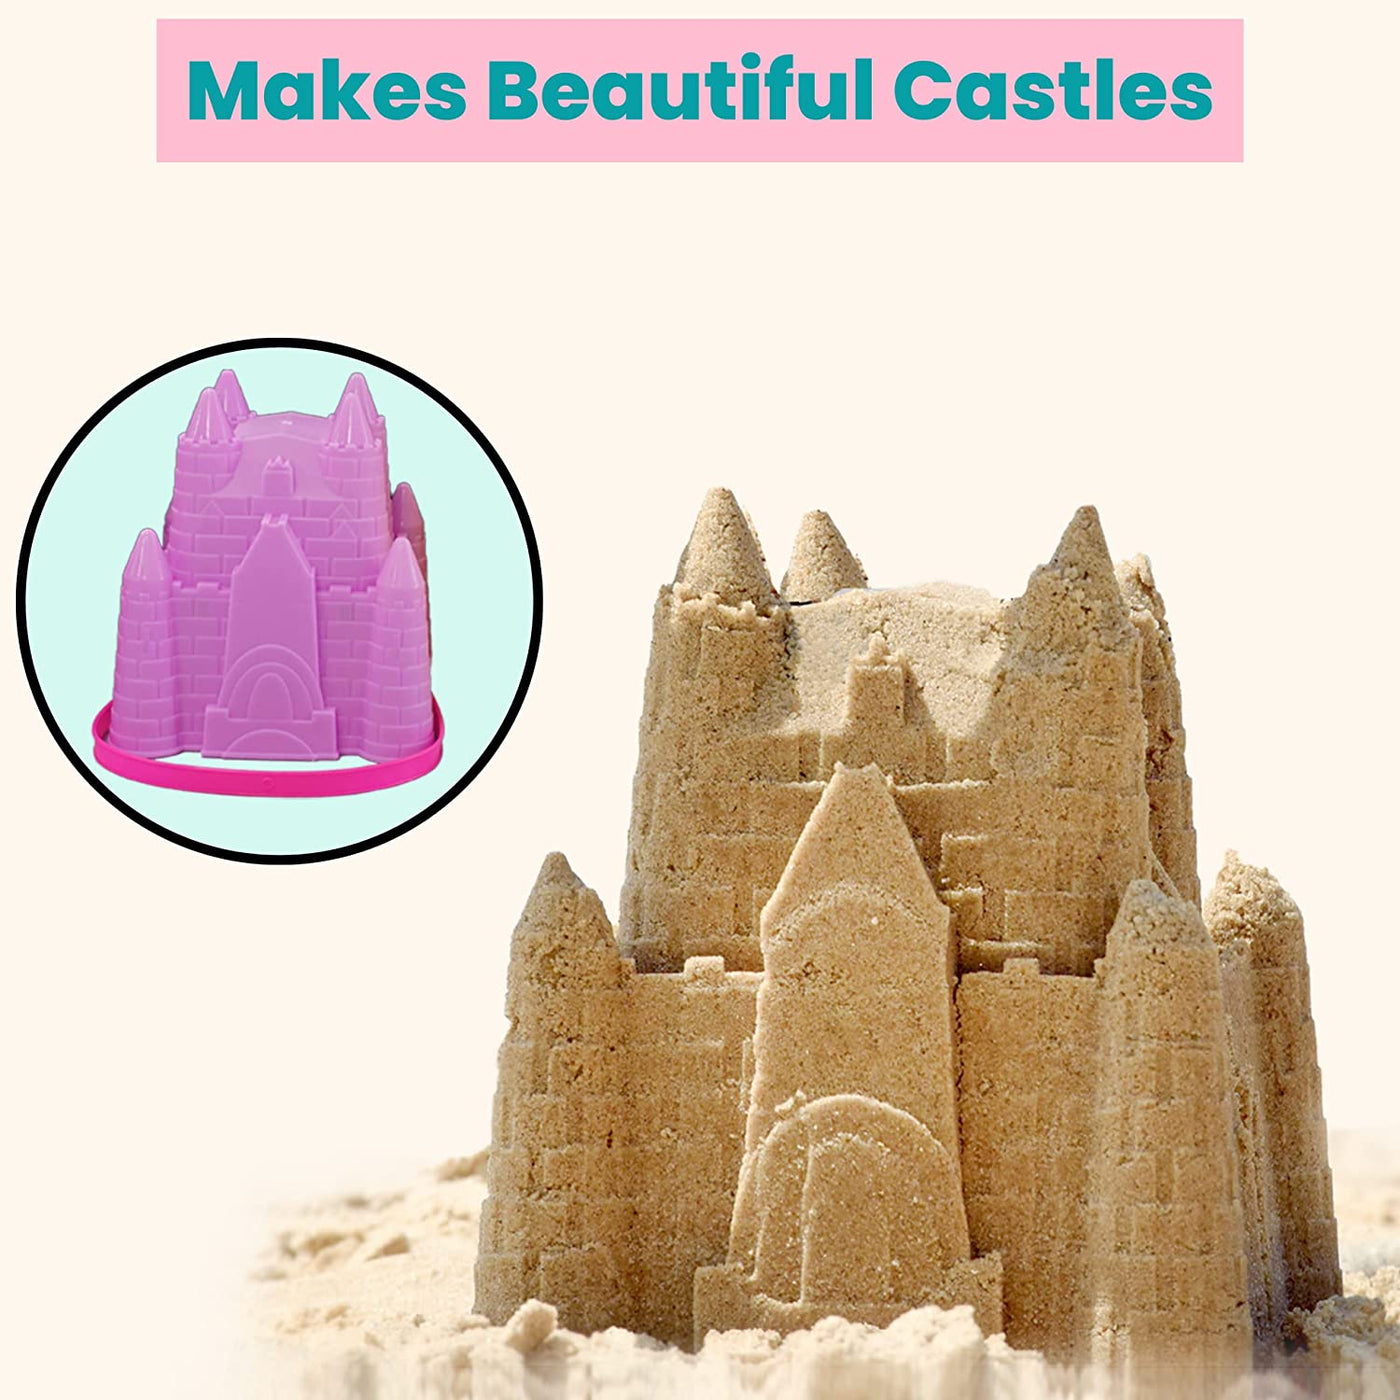 4E's Novelty (4 Sets) Castle Beach Buckets and Shovels, Large Size 7" - Sand Castle Building Kit, Sandcastle Molds Beach Toys for Kids 3-10, Outdoor Sand Toys for Toddlers